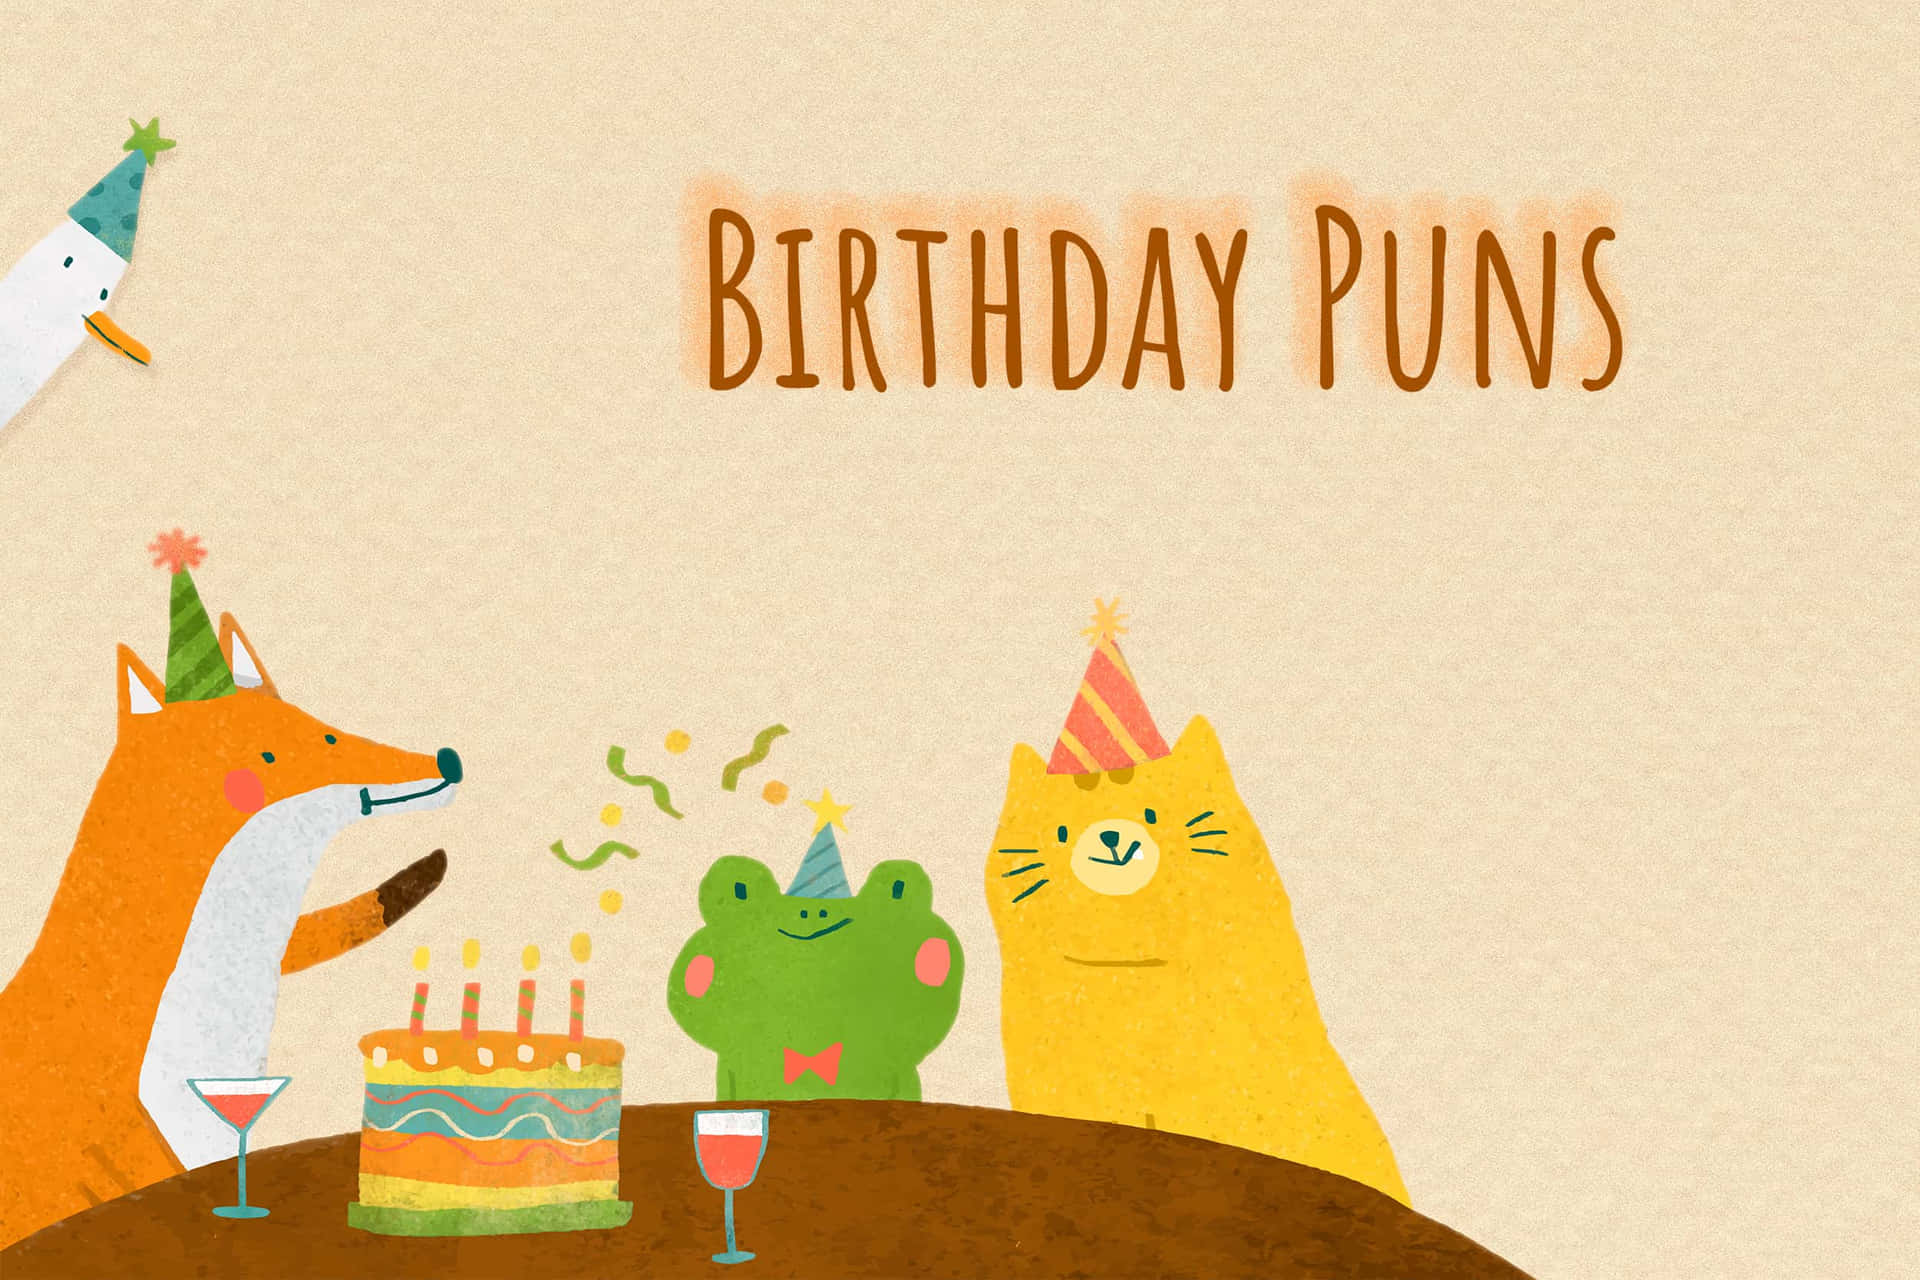 happy birthday funny wallpapers